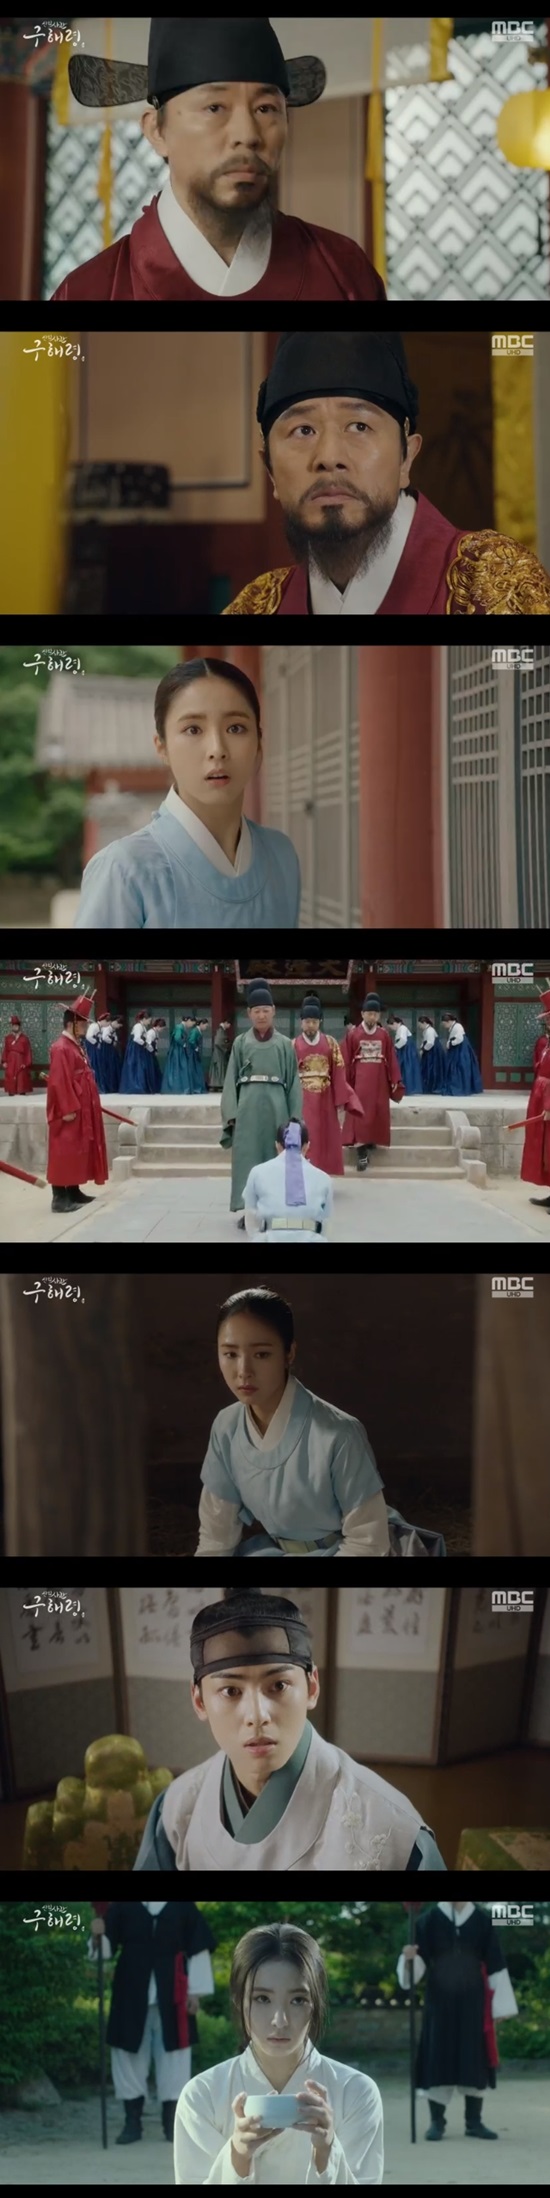 Shin Se-kyung was jailed for breaking the name and Cha Eun-woo was worried.In the 21st episode of the MBC drama Rookie Historian Goo Hae-ryungplayplayed by Kim Ho-soo/directed by Kang Il-soo Han Hyun-hee), which was broadcast on August 21, Rookie Historian Goo Hae-ryungShin Se-kyung) broke the name and was trapped in prison.The military officer Rookie Historian Goo Hae-ryung listened to the conversation between the king (Kim Min-sang) and Min Ik-pyeong (Choi Deok-moon) by remembering what Min Woo-won (Lee Ji-hoon) said, You must enter the school even if there is something to do.Min Woo-won asked, Do you have anything to hide about the Daewon army? And finally Rookie Historian Goo Hae-ryung was caught listening.When the king asked, What did you write down? Rookie Historian Goo Hae-ryung replied, It is a private matter. I can not tell you.Lee Lim (Cha Eun-woo) was appalled to hear that Rookie Historian Goo Hae-ryung broke the name and was taken to the bank.Her Sambo (Sungjiru) blocked Irim from running to the king right away.Yoo Gyeong-sang